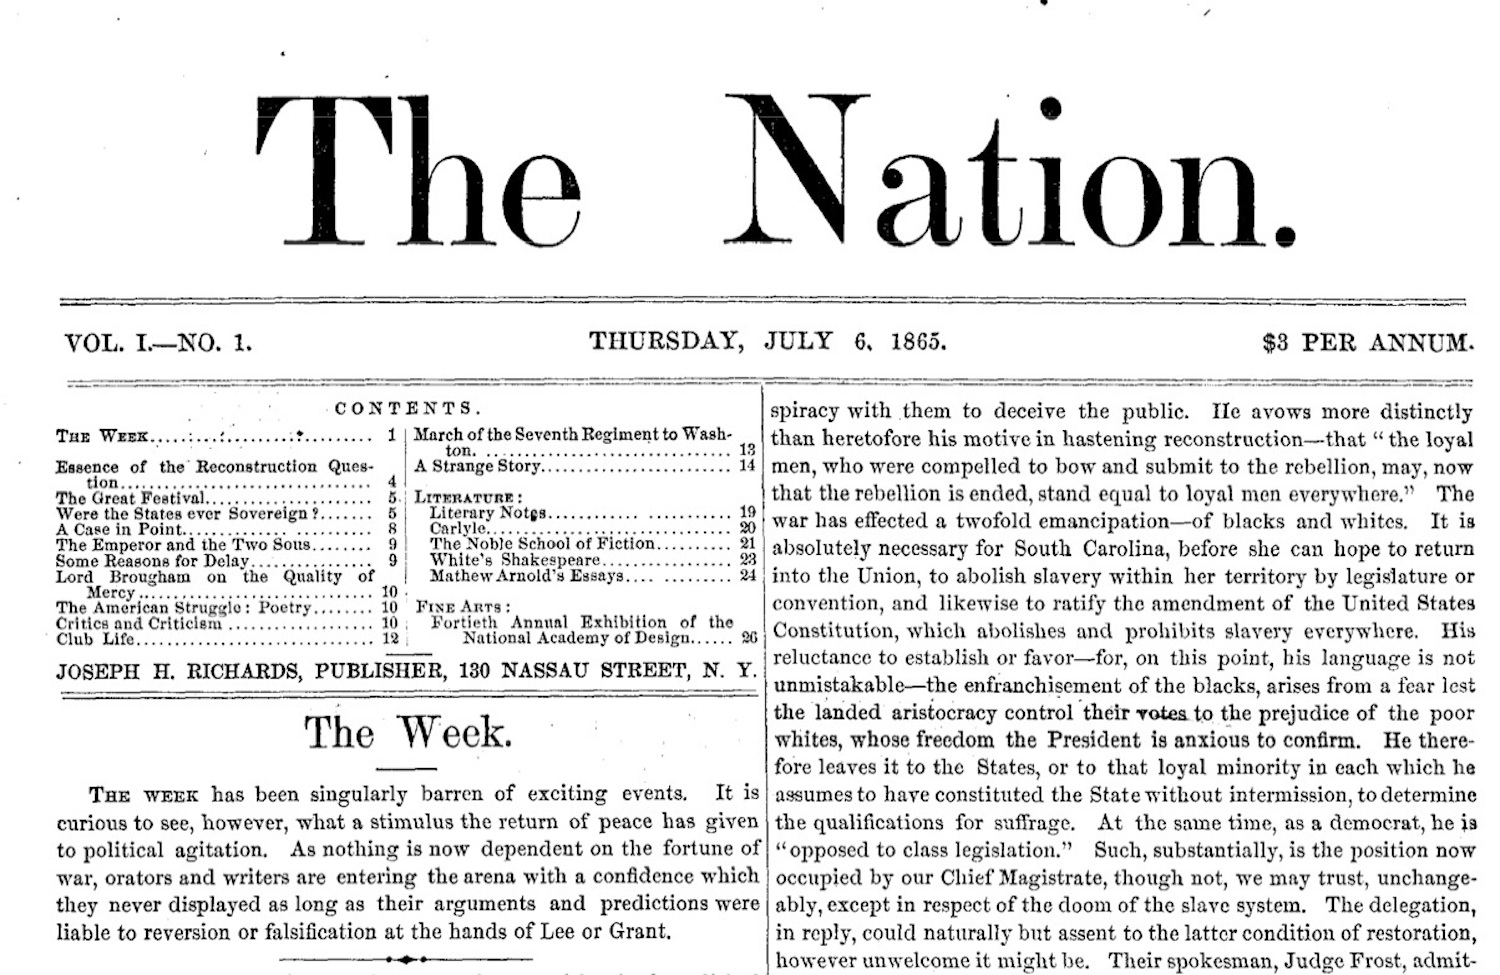 Introducing ‘The Almanac’: This Day in ‘Nation’ History